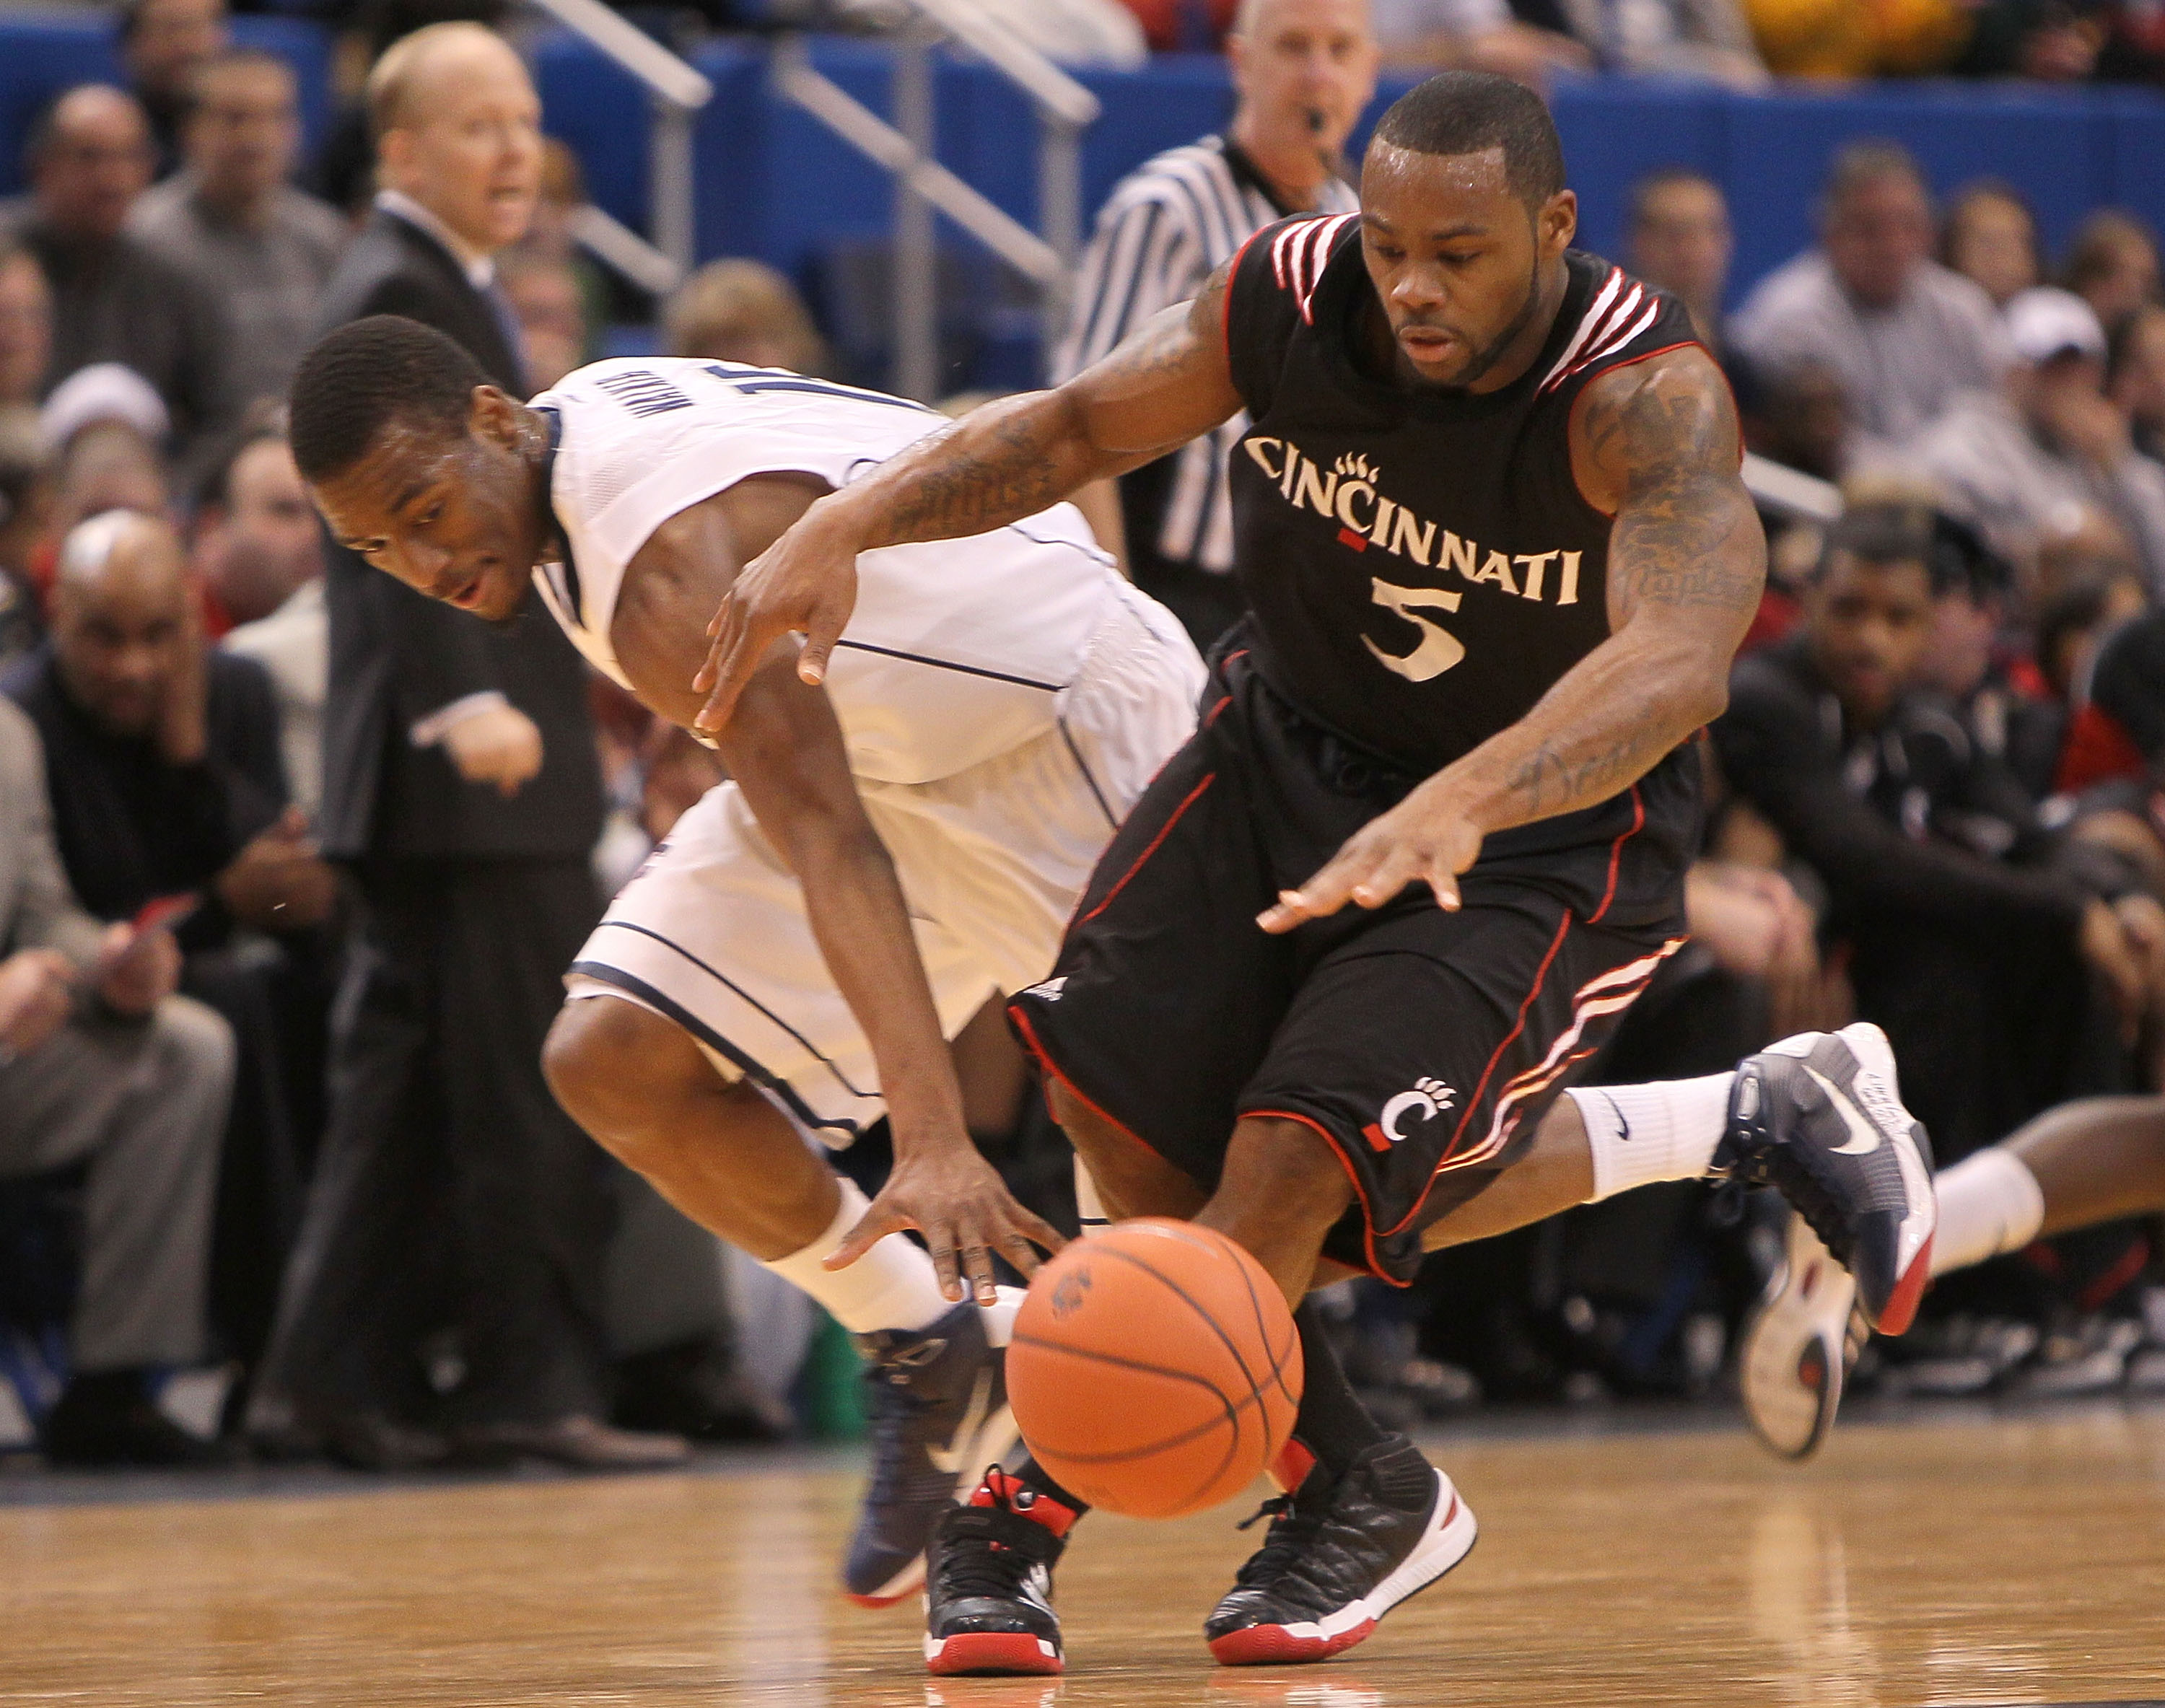 HARTFORD, CT - FEBRUARY 13: Kemba Walker #15 of the Connecticut Huskies battles against Deonta Vaughn #5 of the Cincinnati Bearcats at the XL Center on February 13, 2010 in Hartford, Connecticut. (Photo by Jim Rogash/Getty Images)